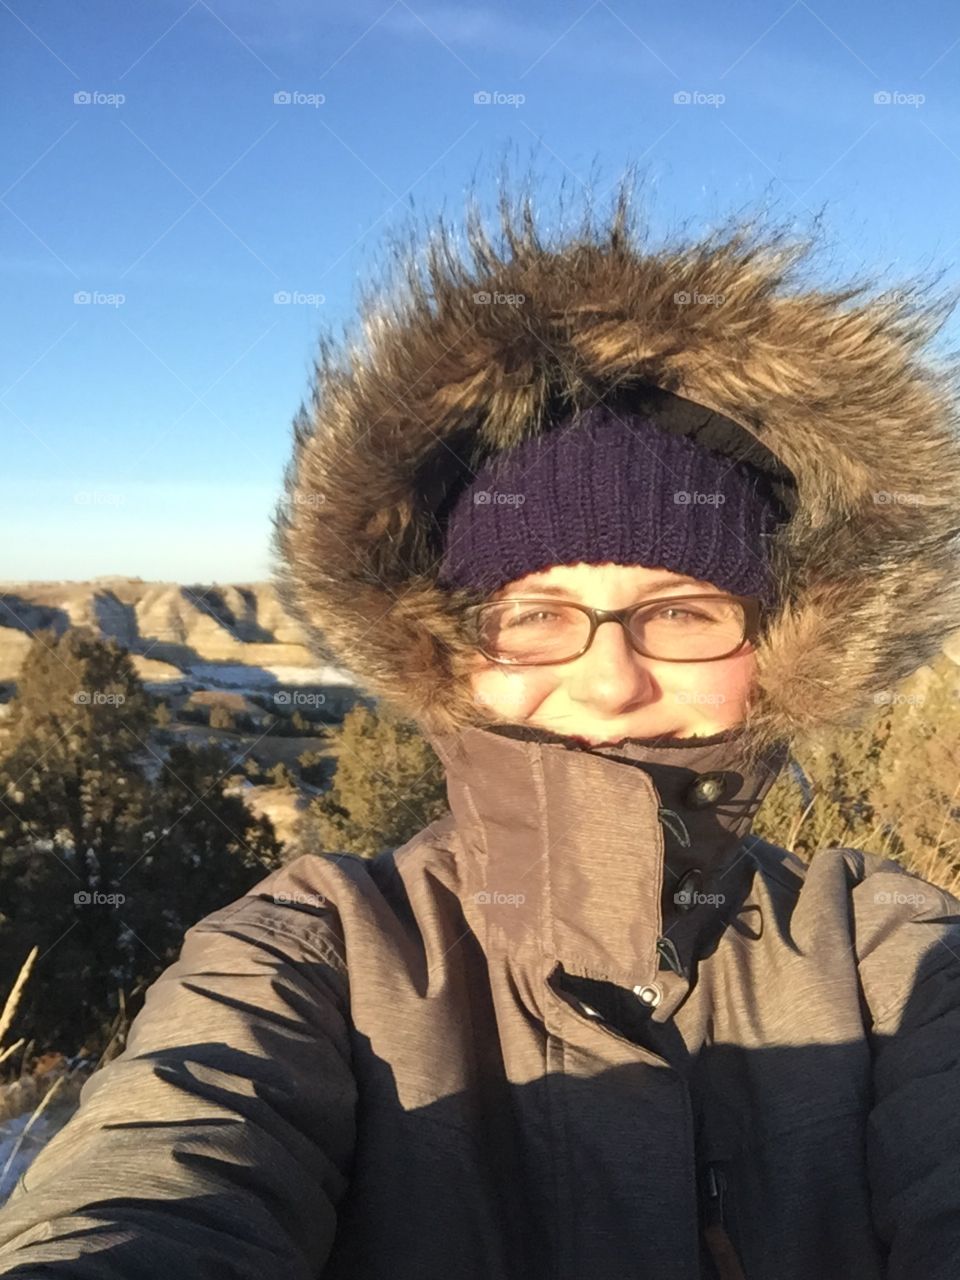 Hiking in Theodore Roosevelt National Park on a frigid day.